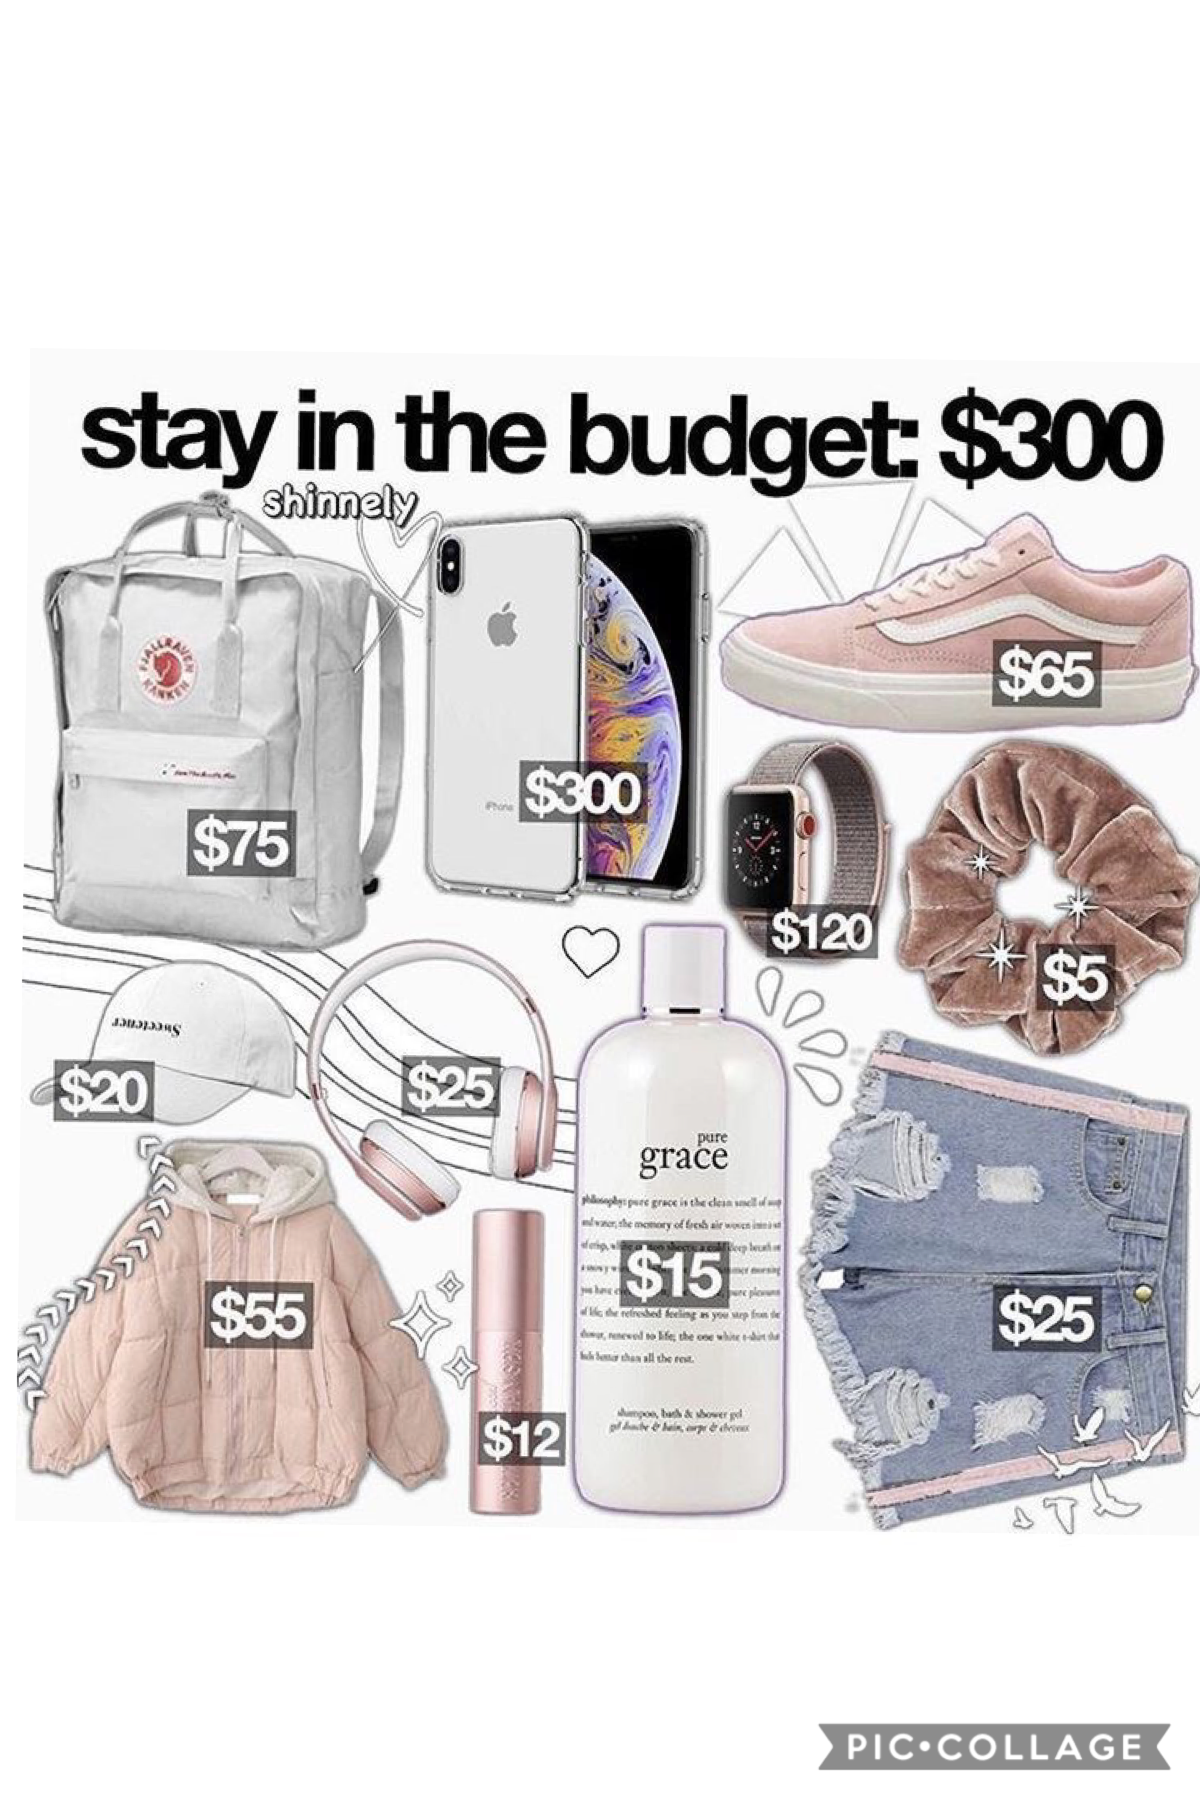 🌊tap🌊



heres another stay in the budget 